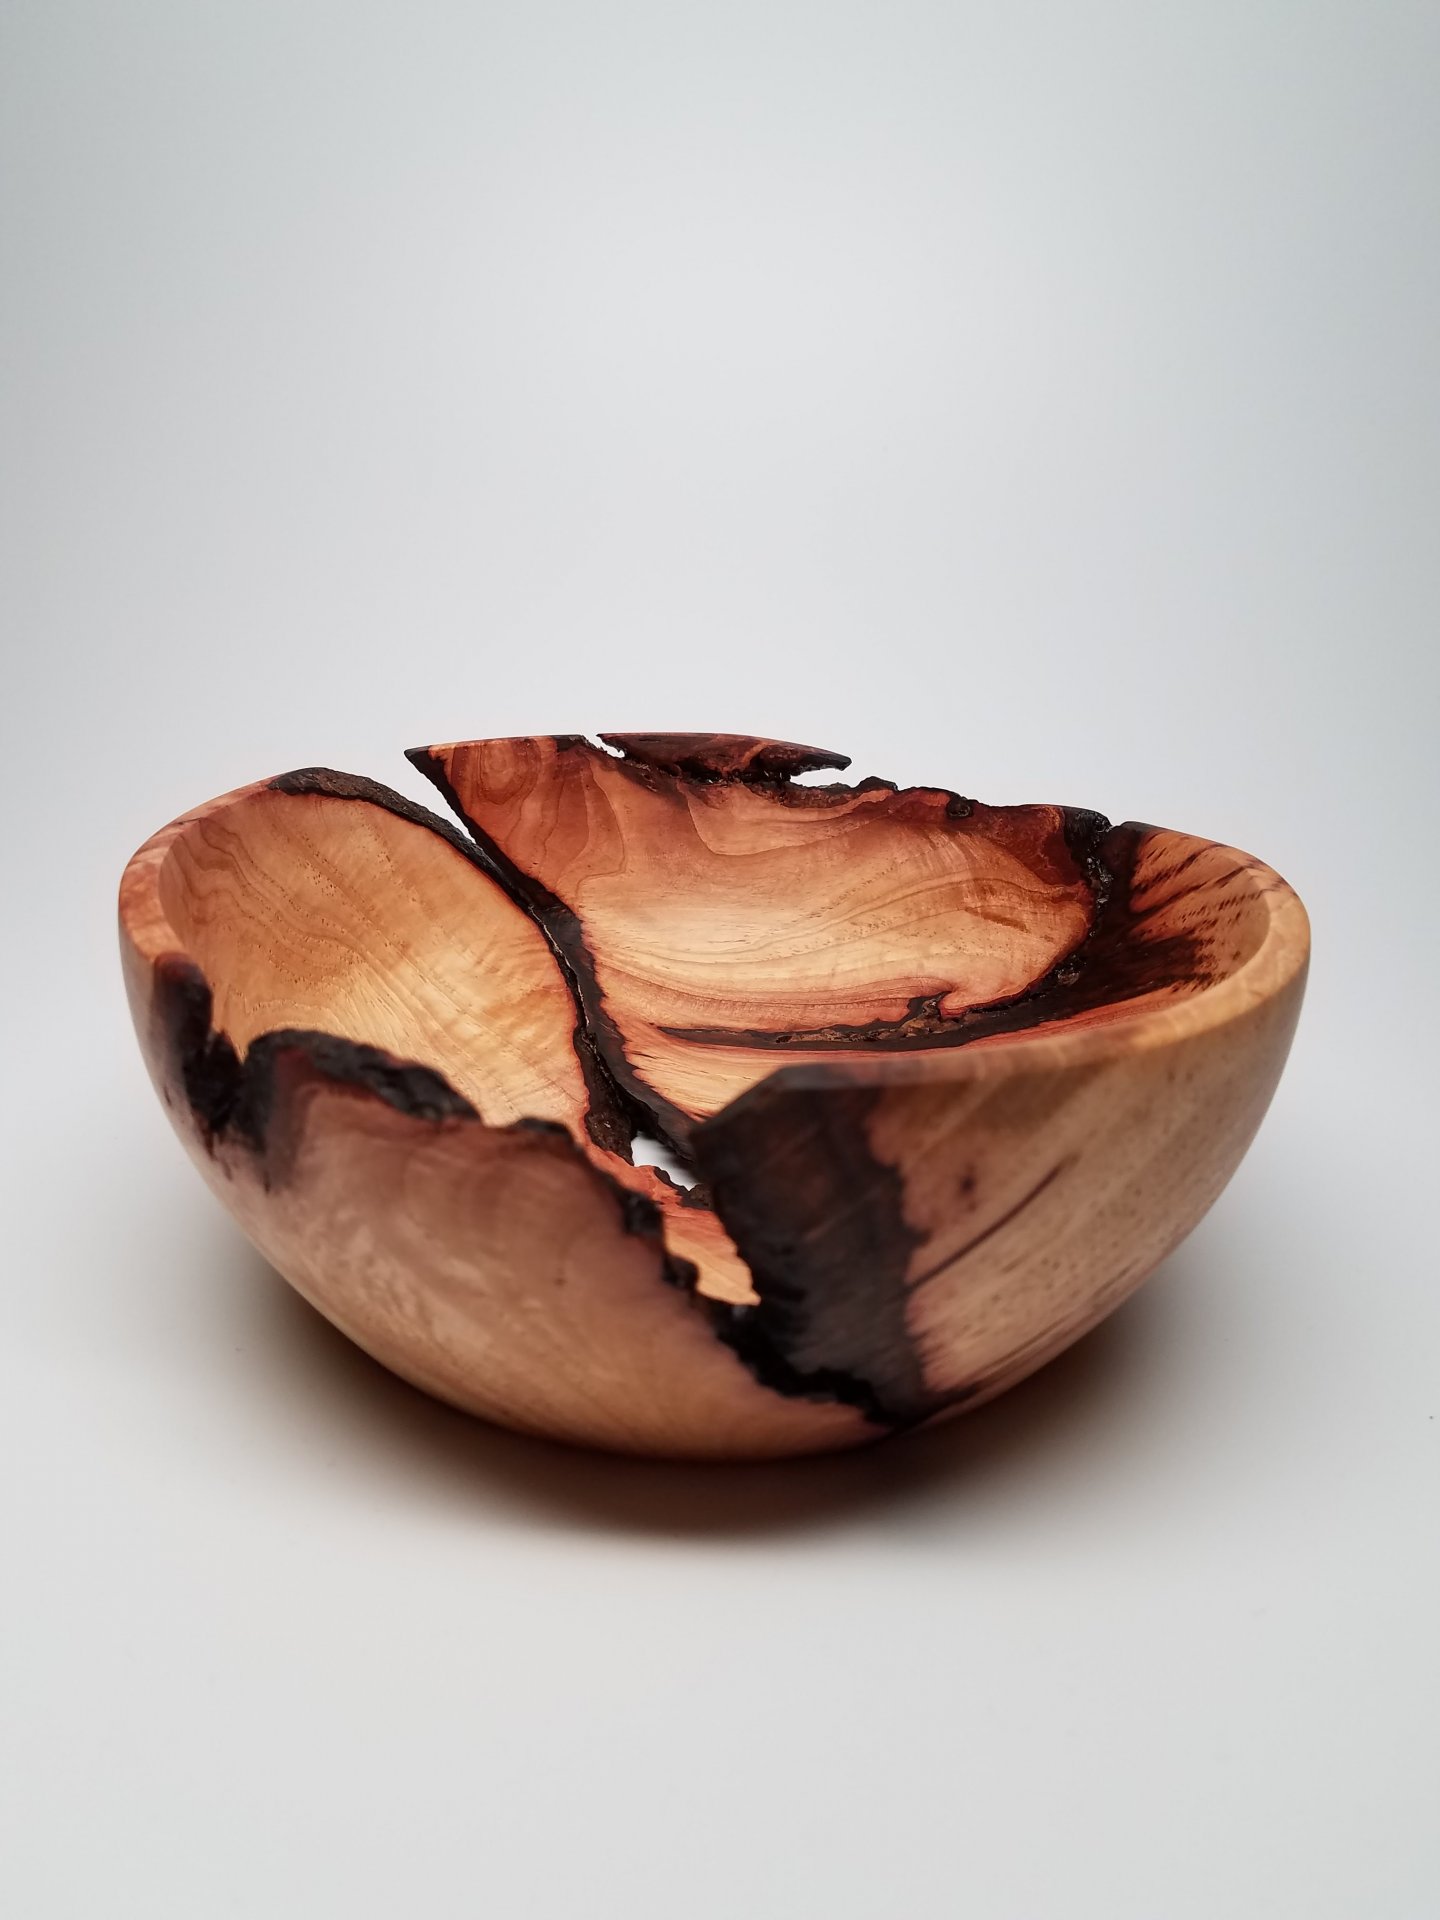 Pecan bowl with bark inclusion